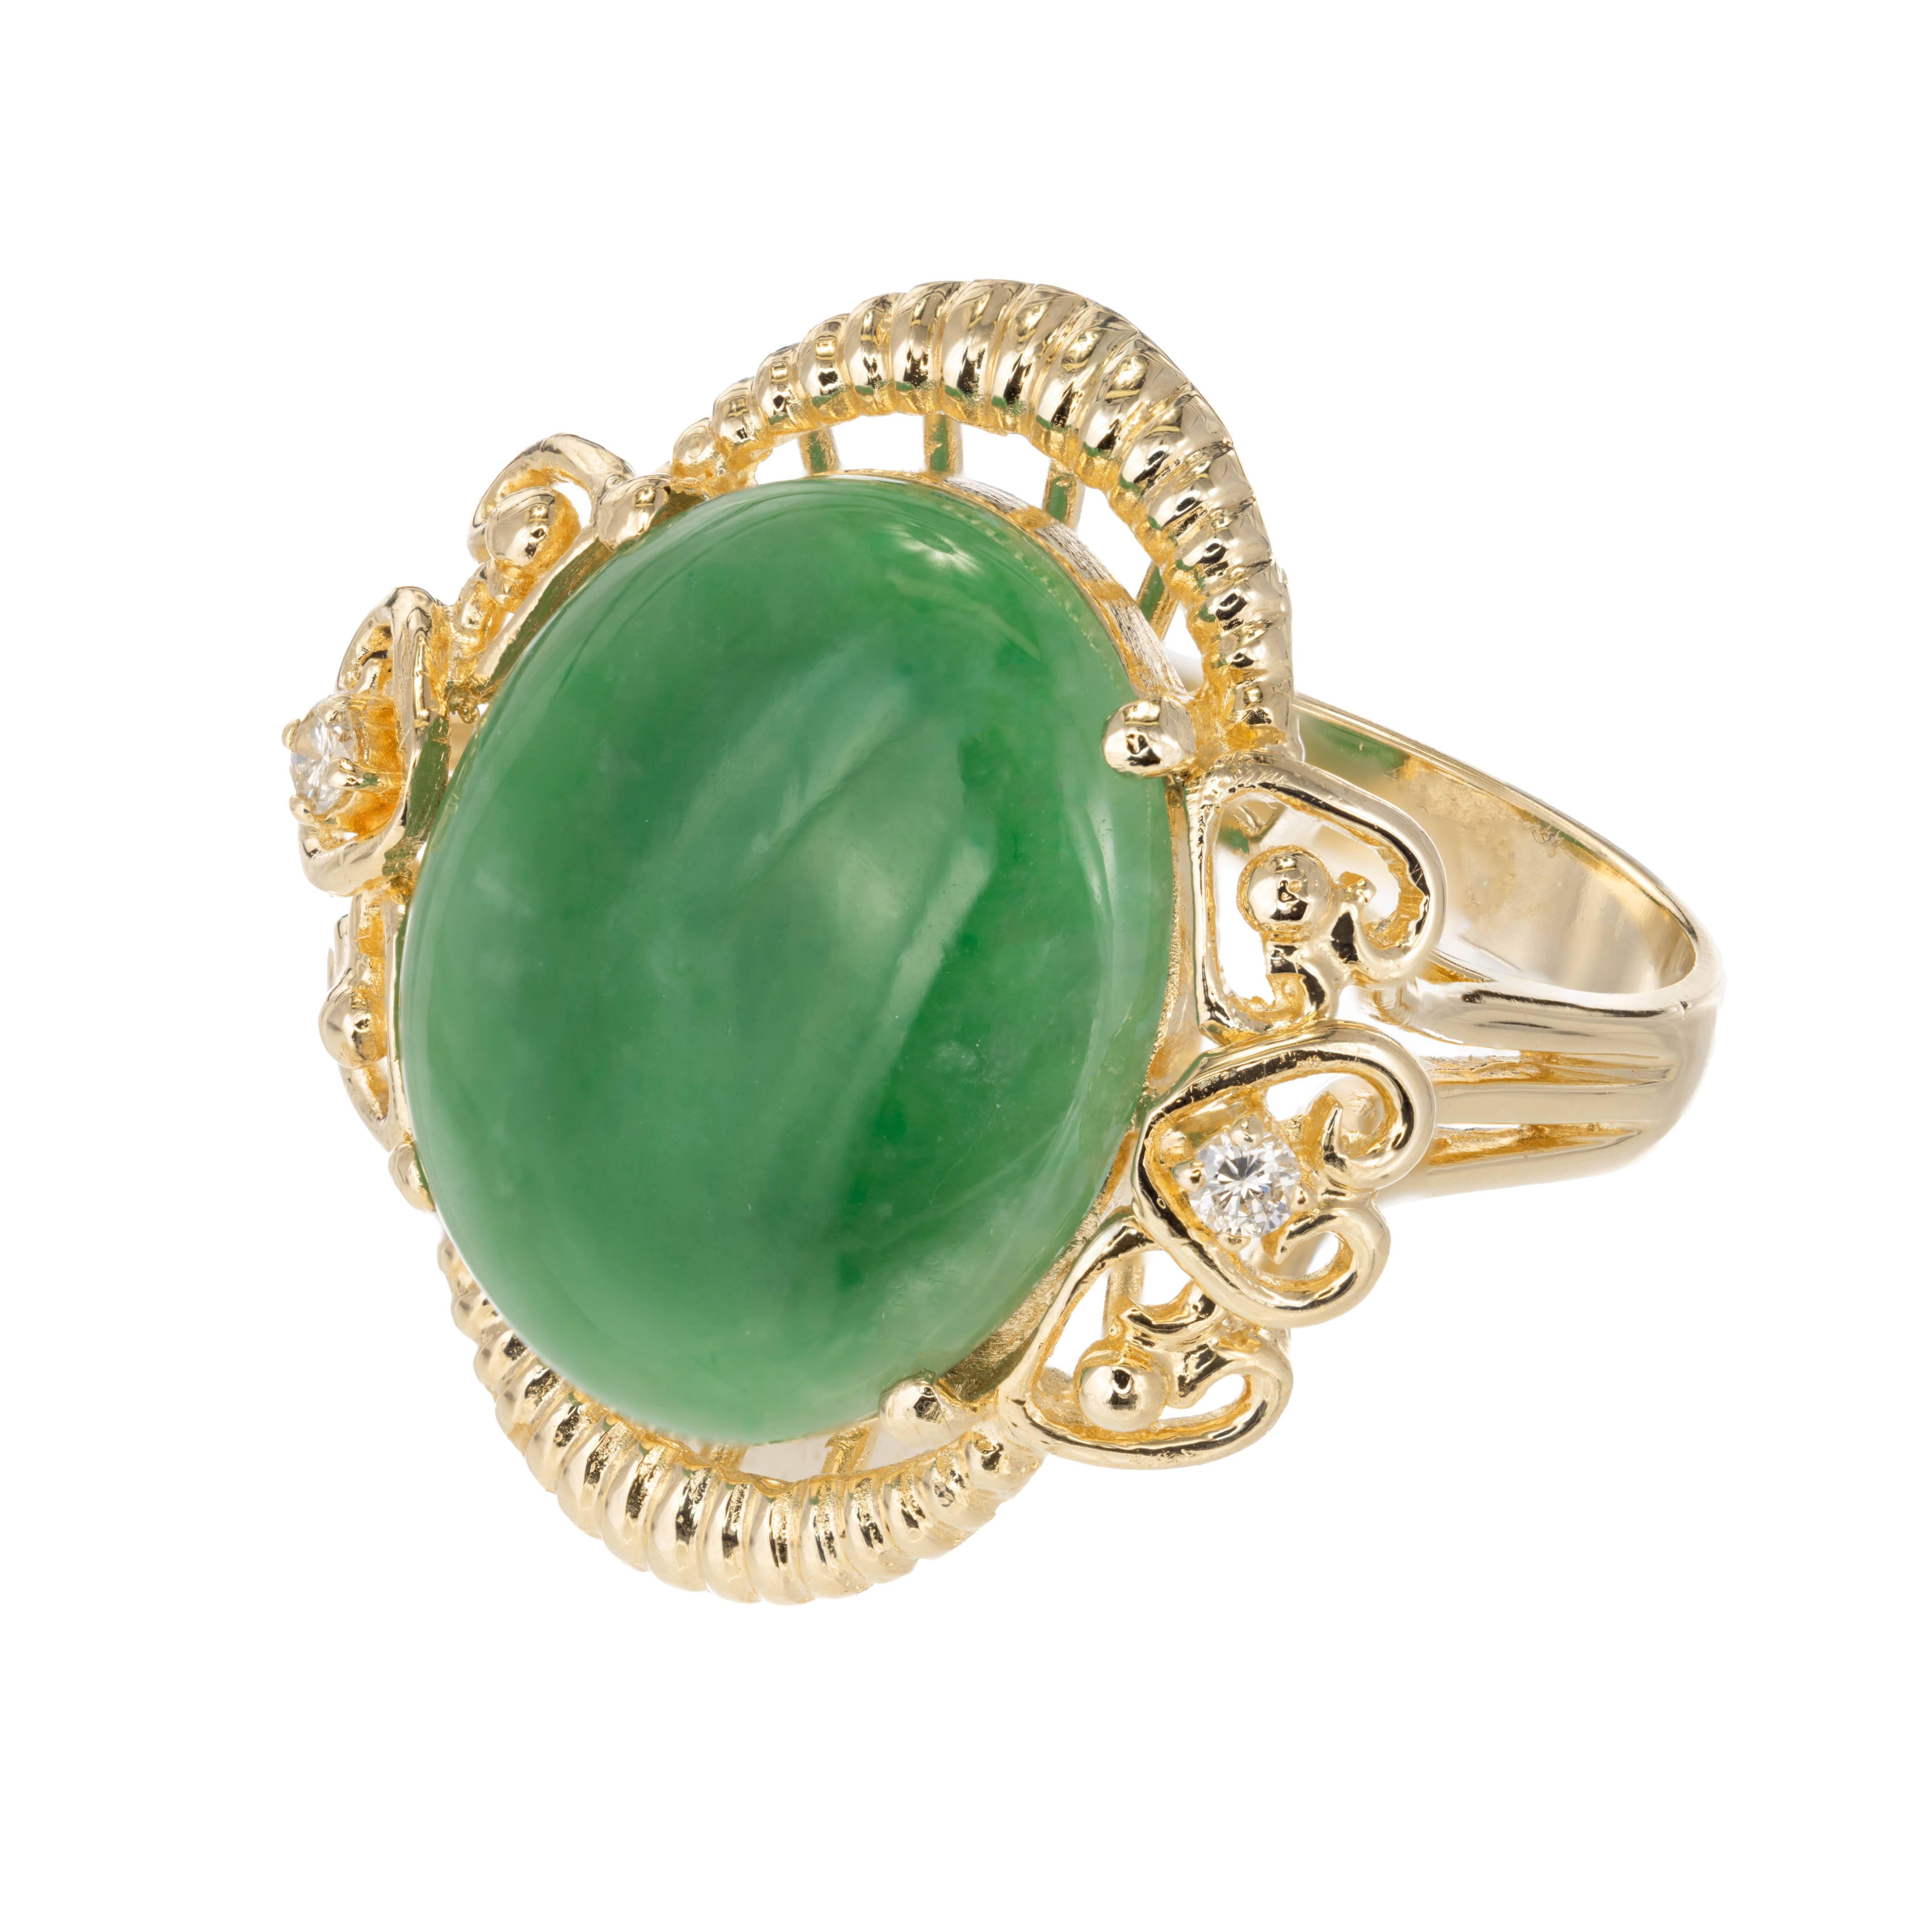 GIA certified natural color Cabochon Jadeite Jade diamond cocktail Ring Circa 1950. 14k yellow gold setting with diamond accents. Well-polished and translucent. Polymer impregnated to enhance the luster. A permanent proprietary process in the